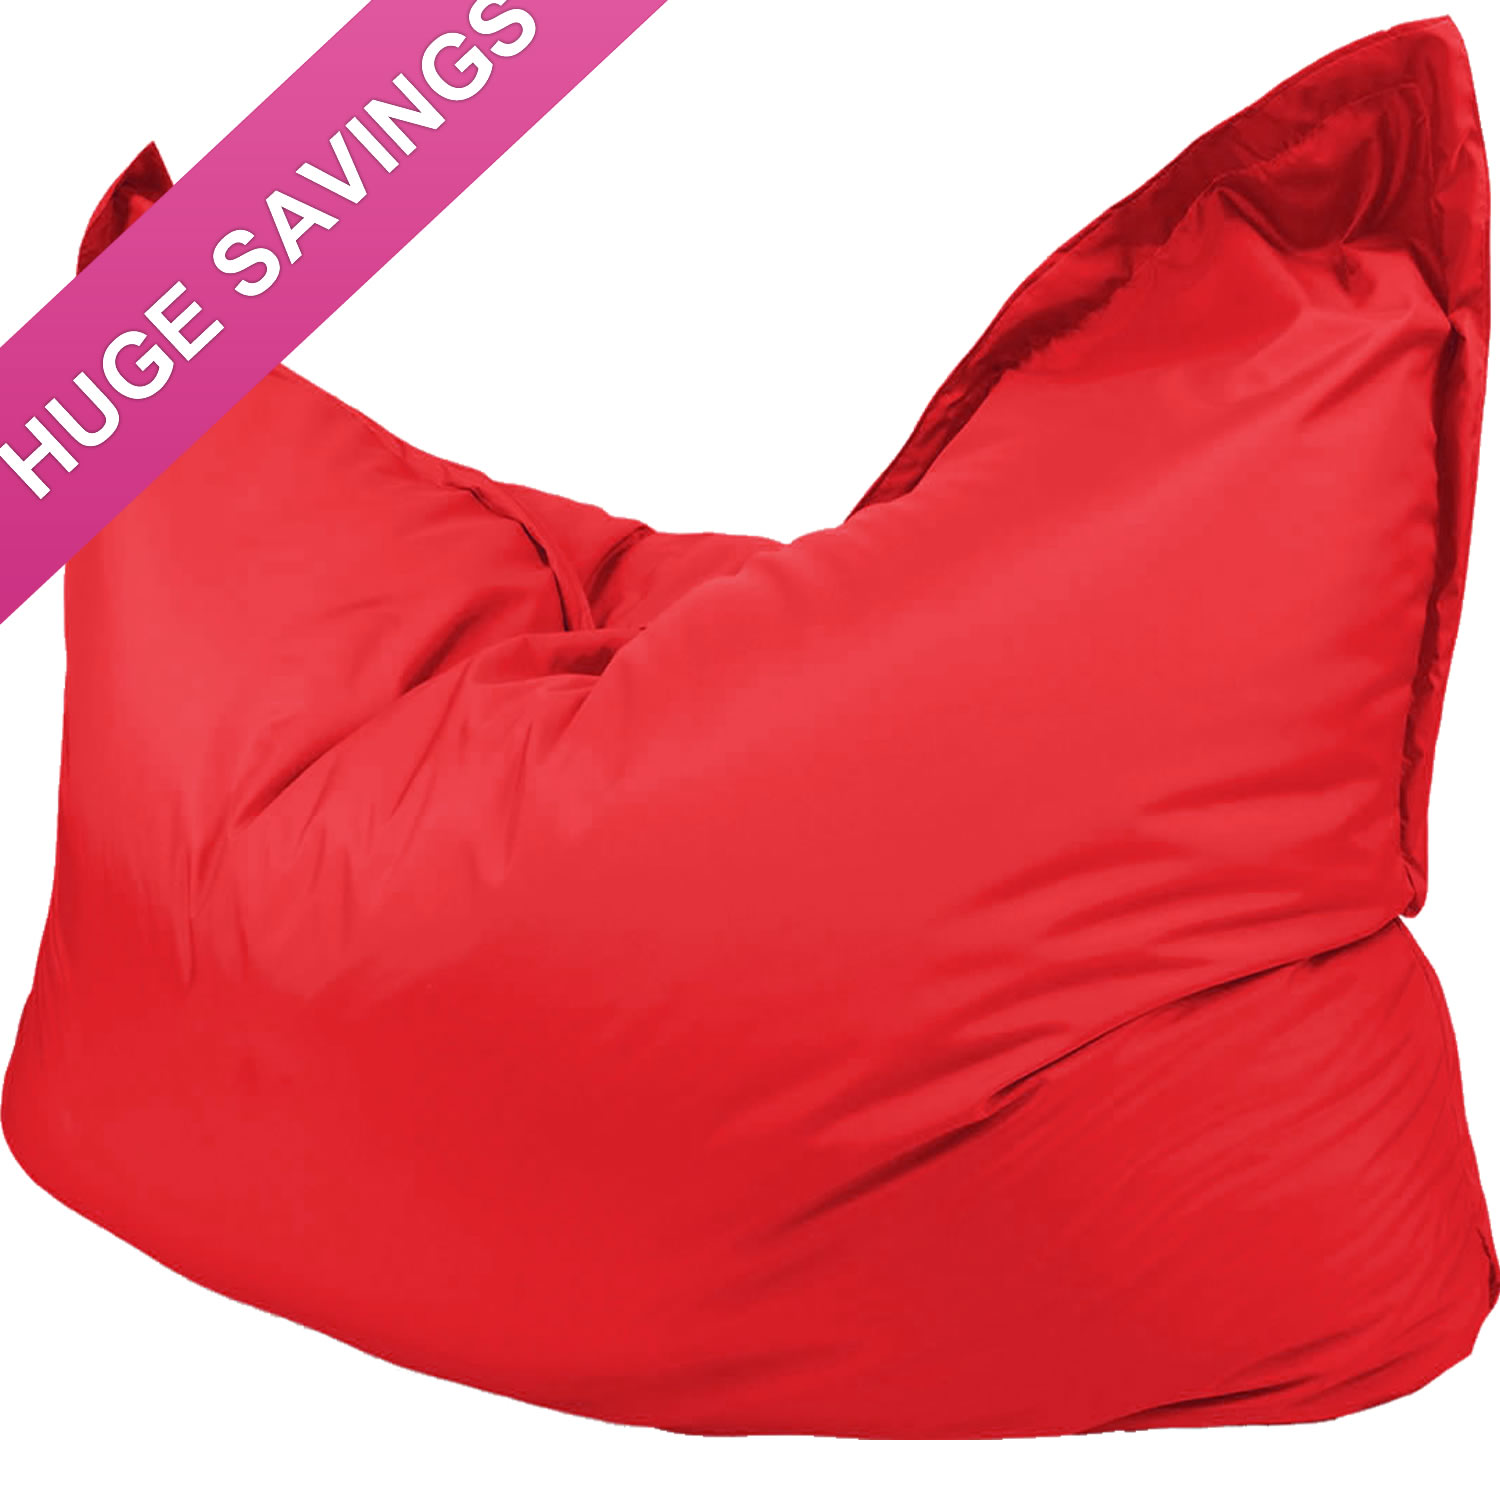 Mega Big Brother Beanbag for indoors or Outdoors